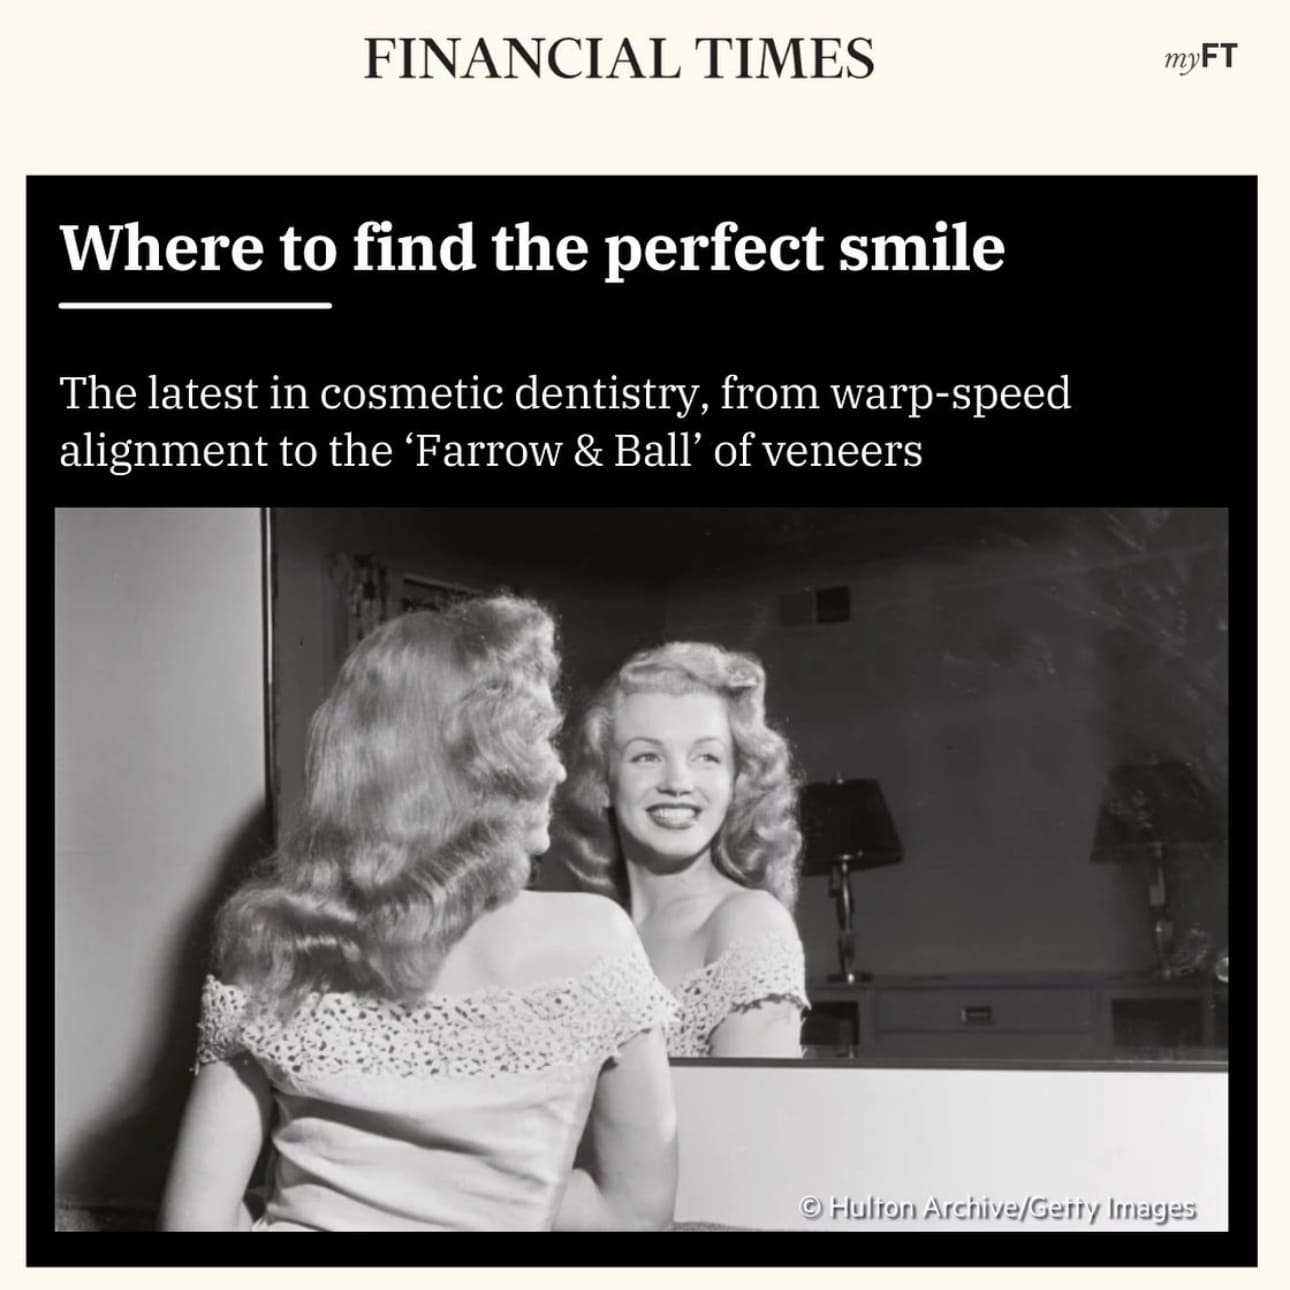 Where to find the perfect smile